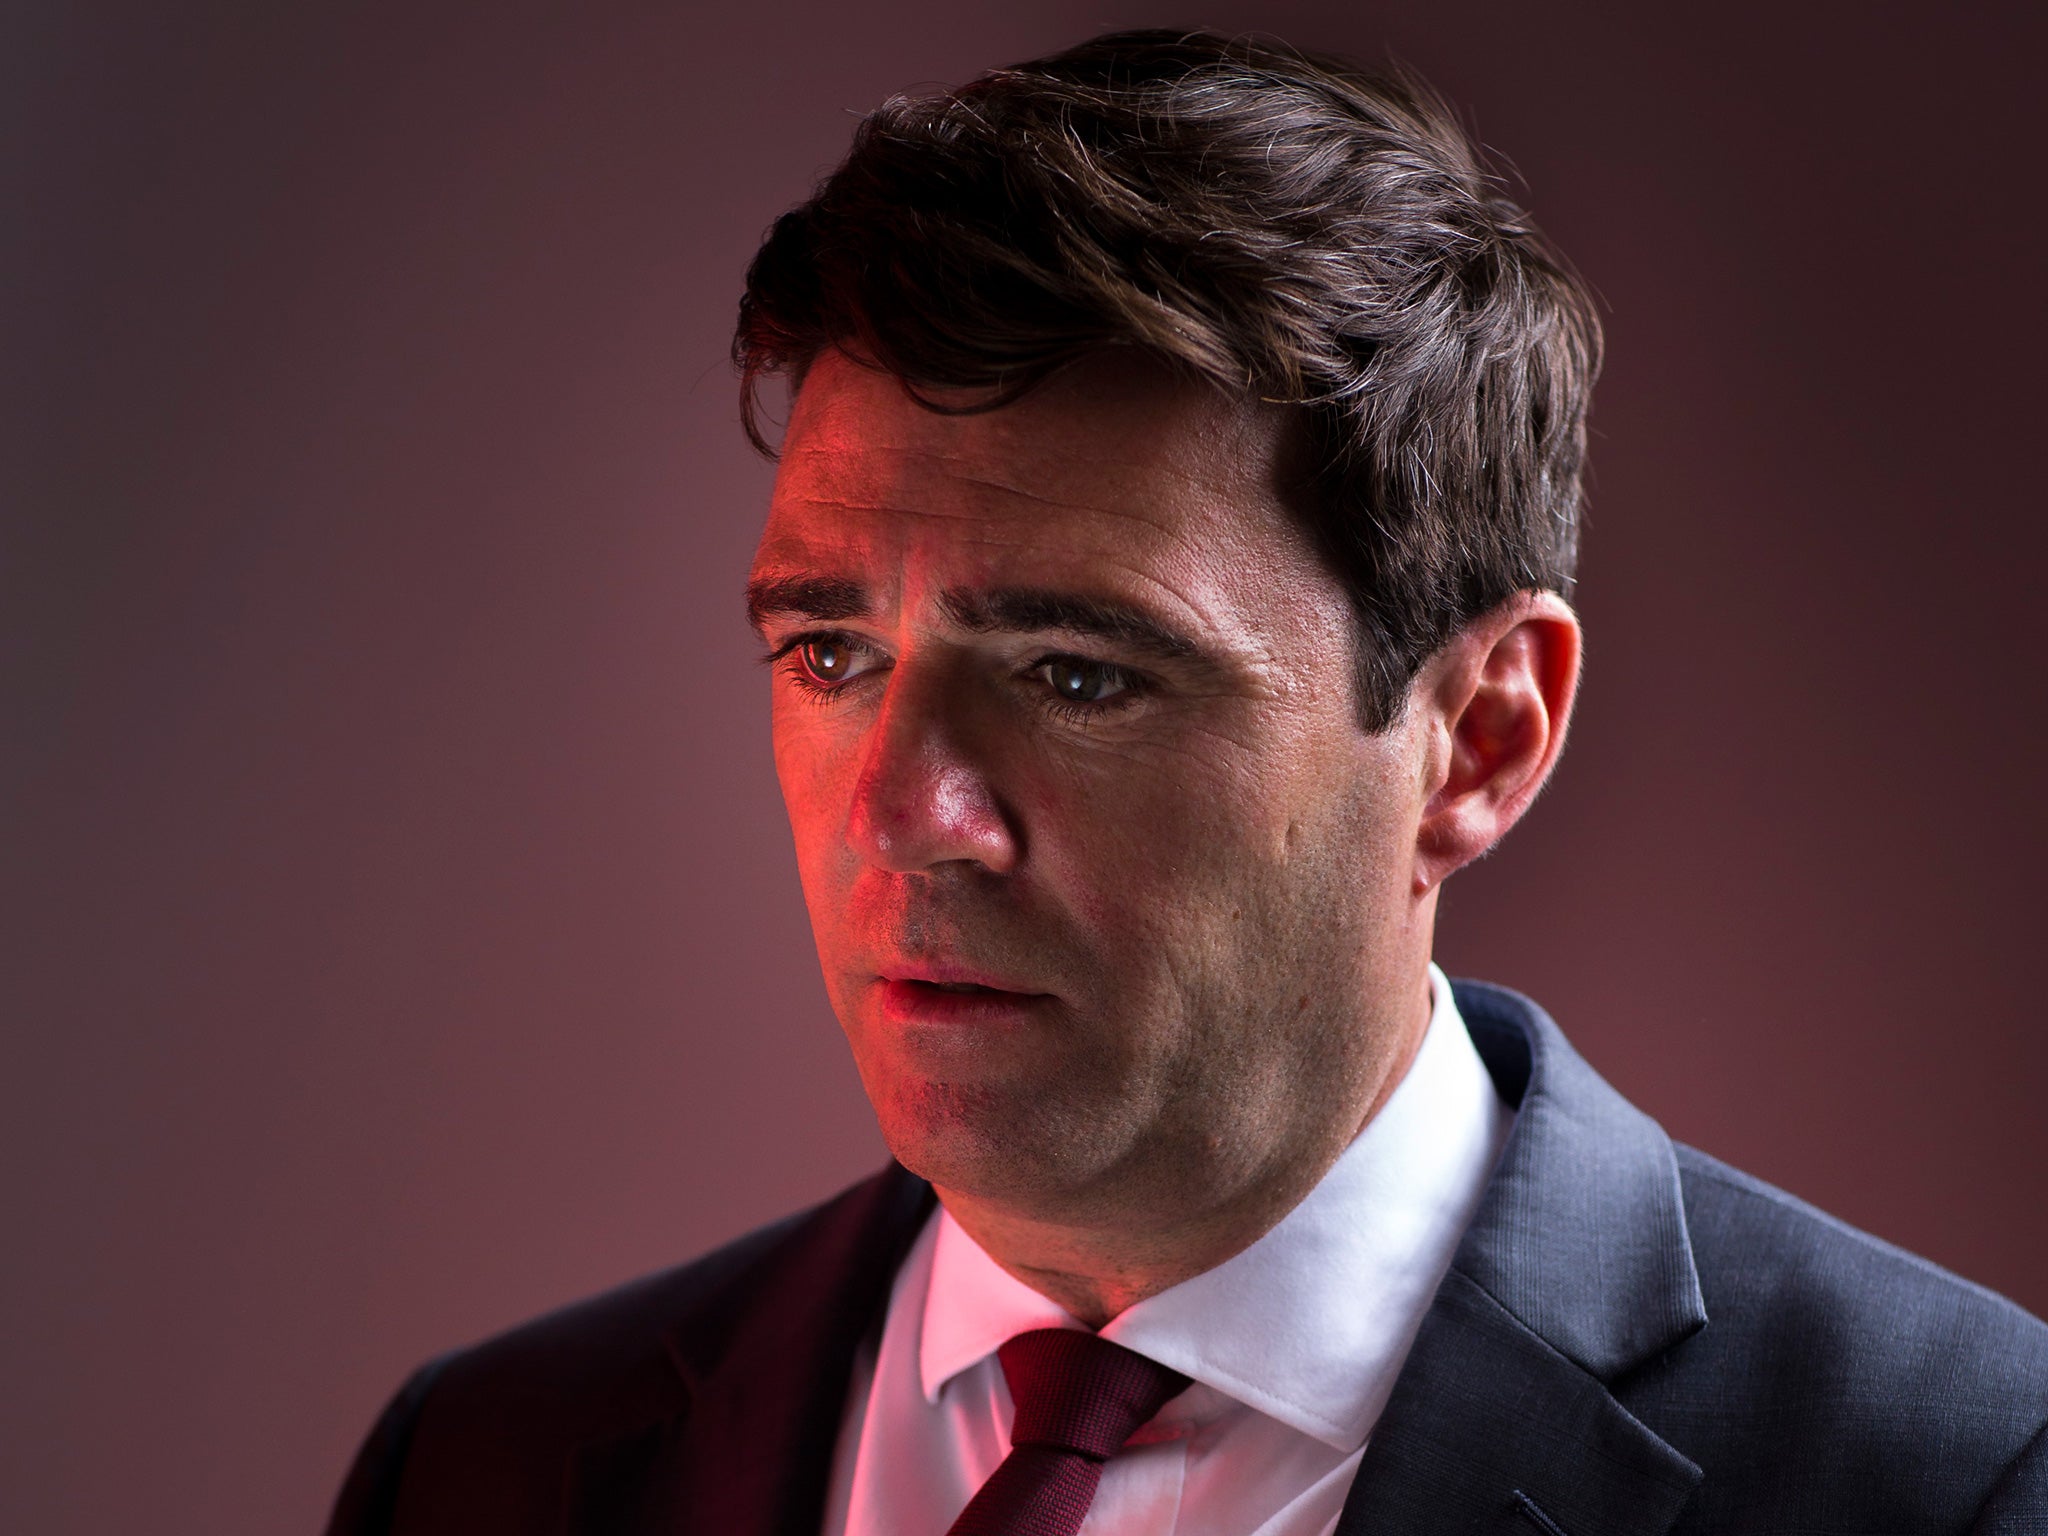 Andy Burnham says he believes he can win the Labour leadership vote next month